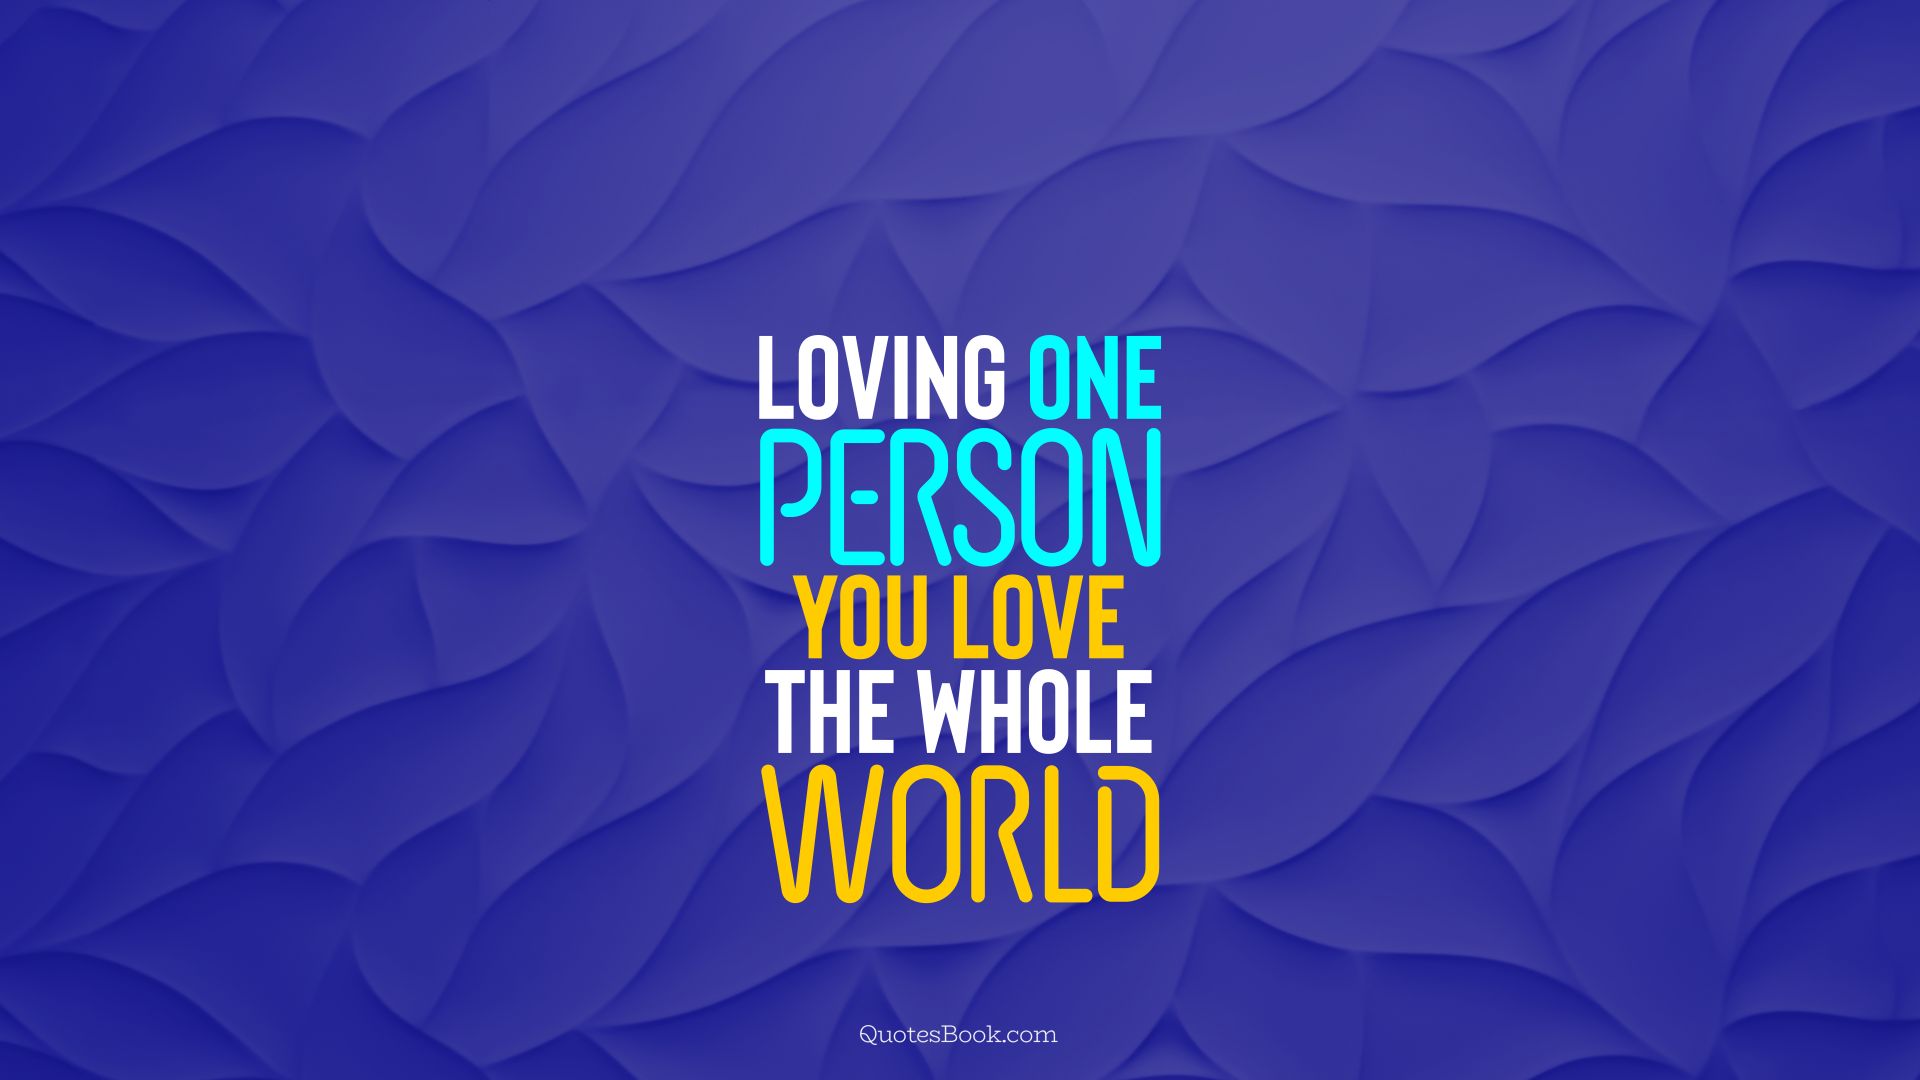 Loving one person, you love the whole world. - Quote by QuotesBook